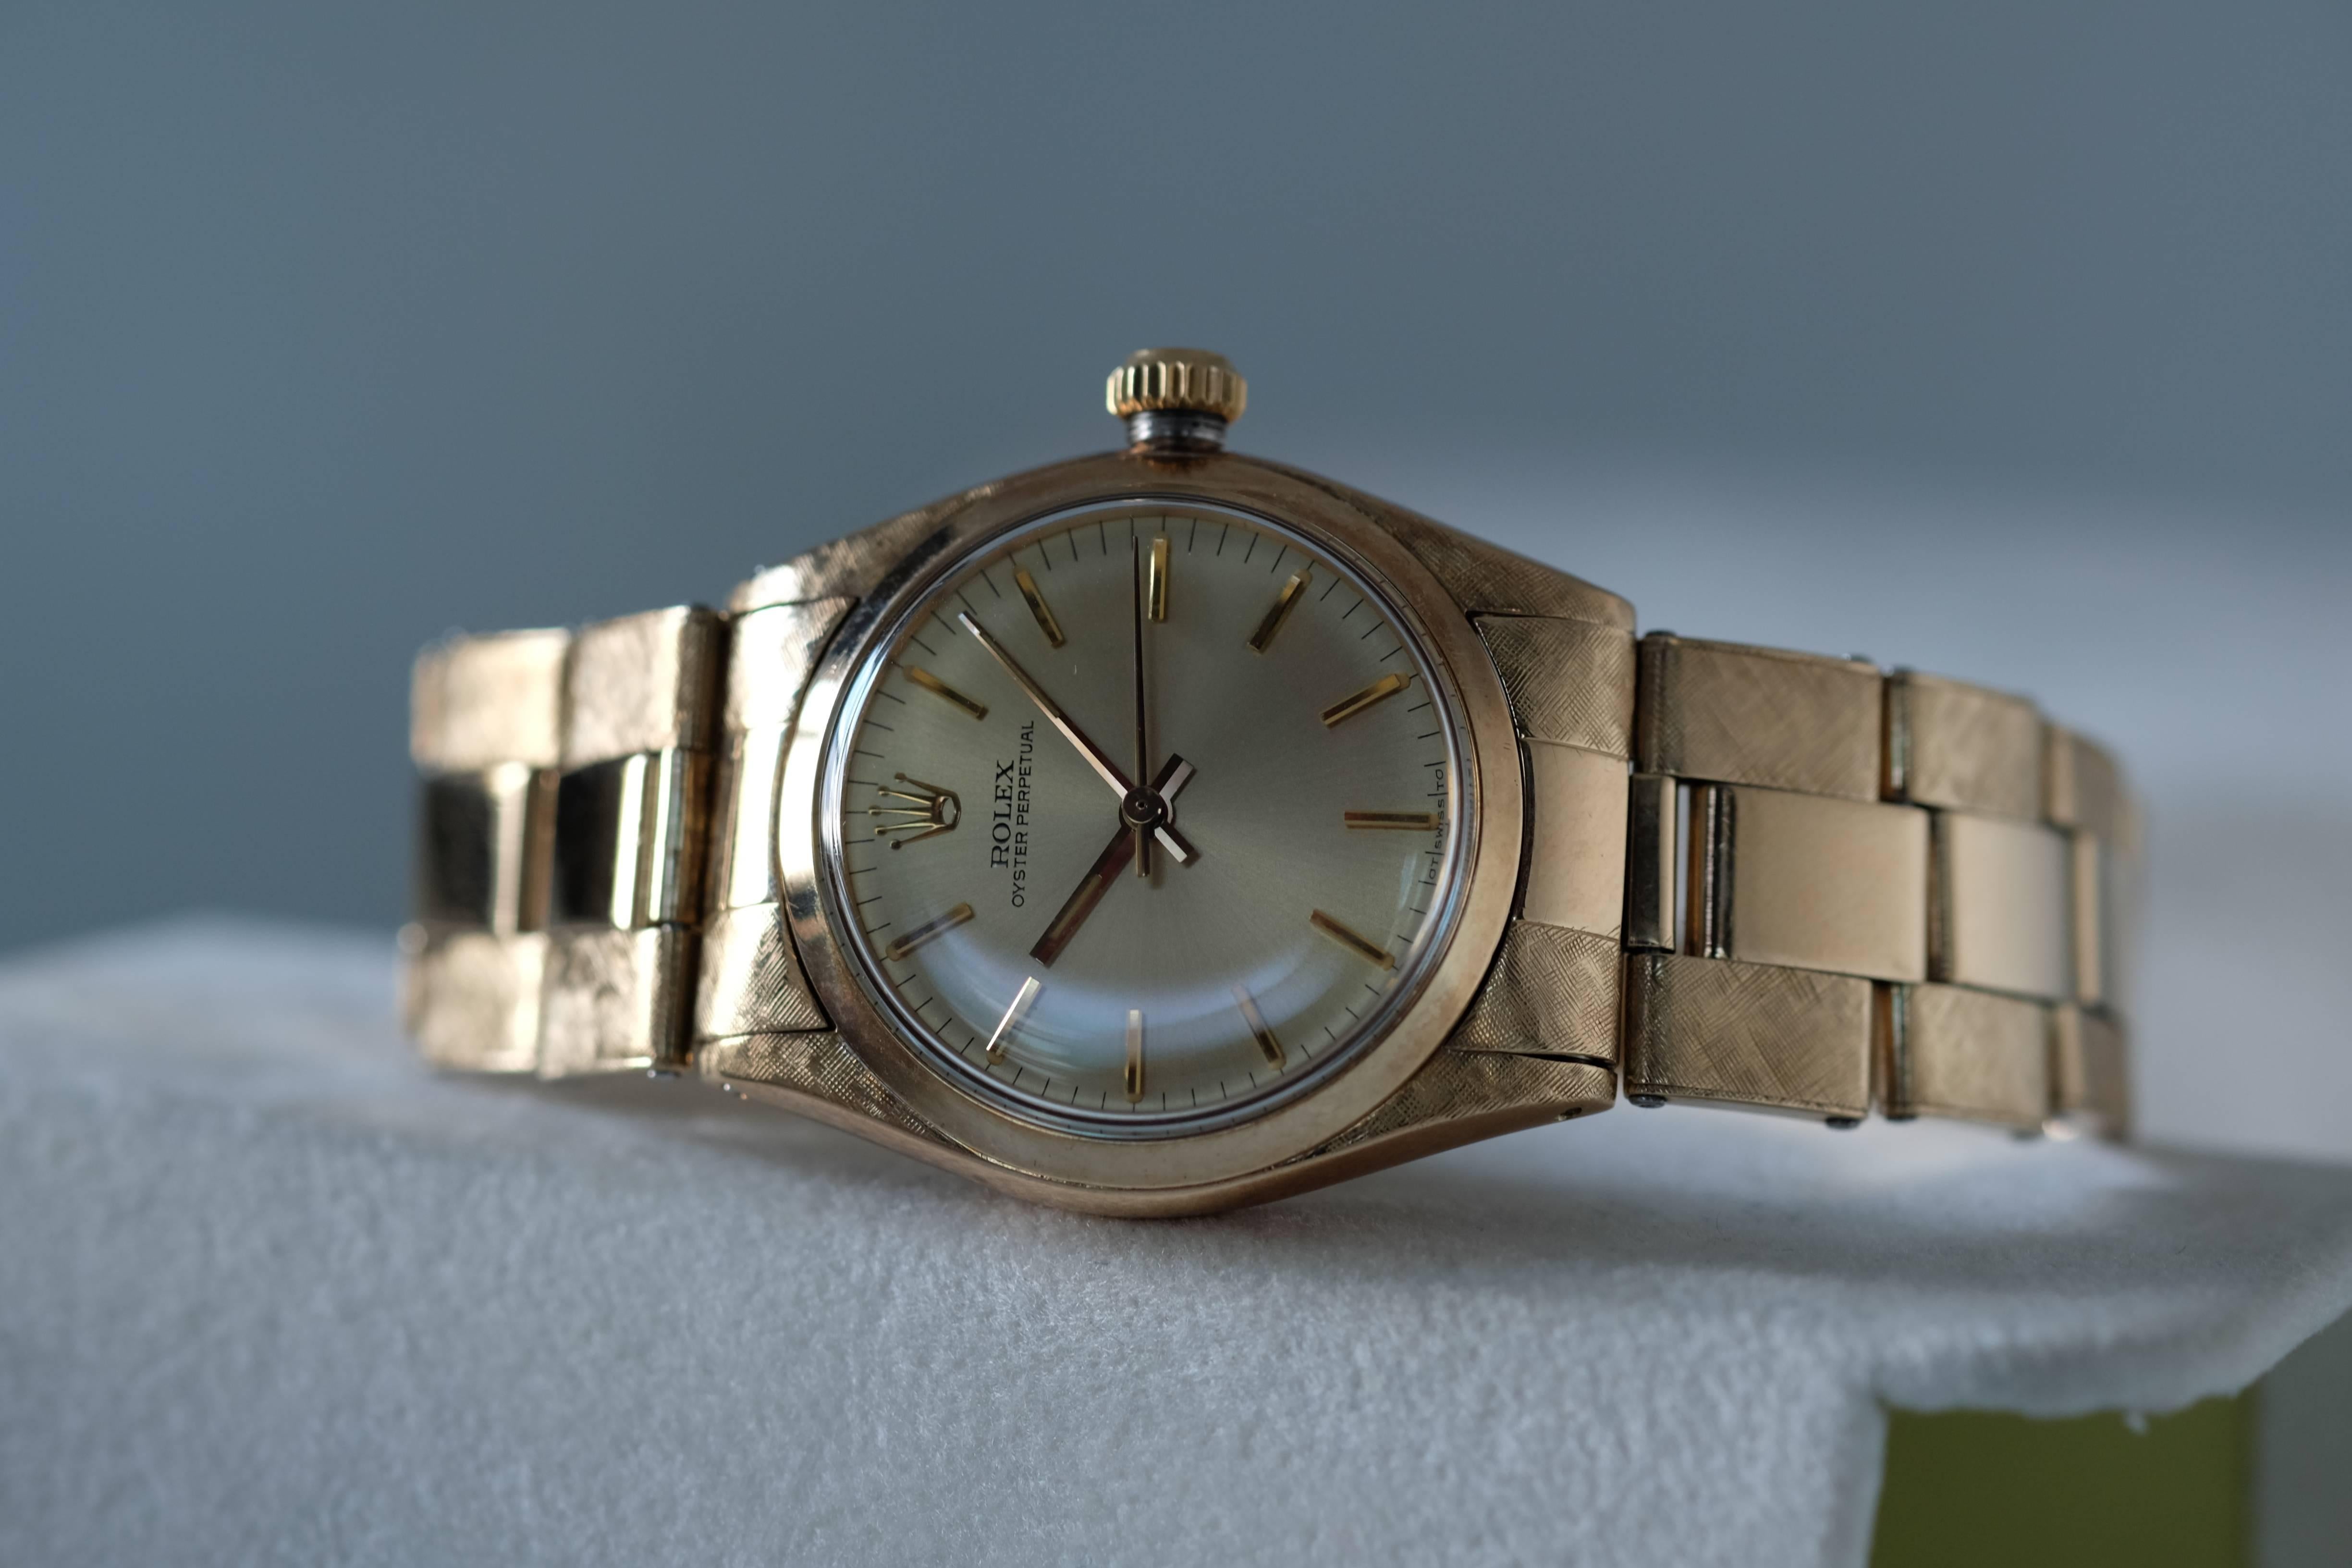 A New Old Stock  Ladies Rolex Oyster Perpetual 14k Yellow Gold with Florentine Finish

Reference: 6551

Circa: 1960s

Movement: Manual-wind Rolex Cal. 1160

Case: 30mm 14k yellow gold with Florentine finish, screw-down case back and crown;